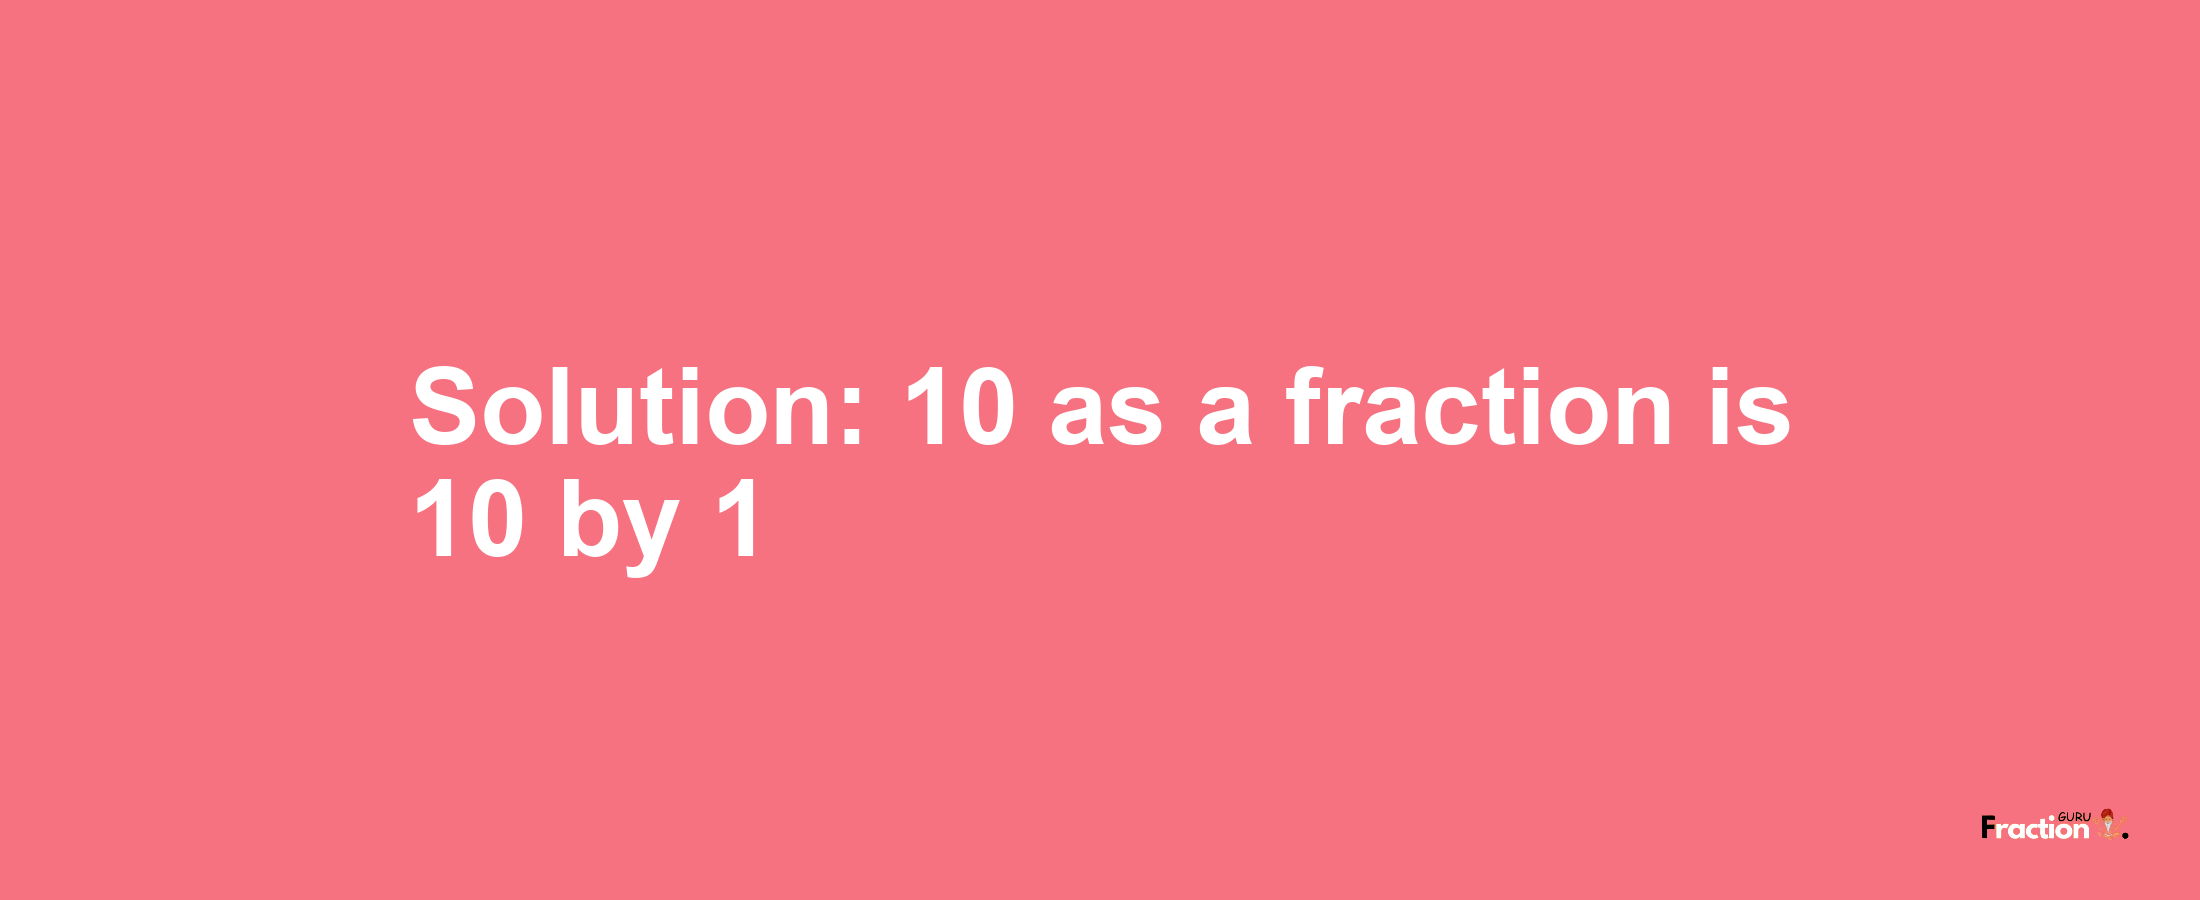 Solution:10 as a fraction is 10/1